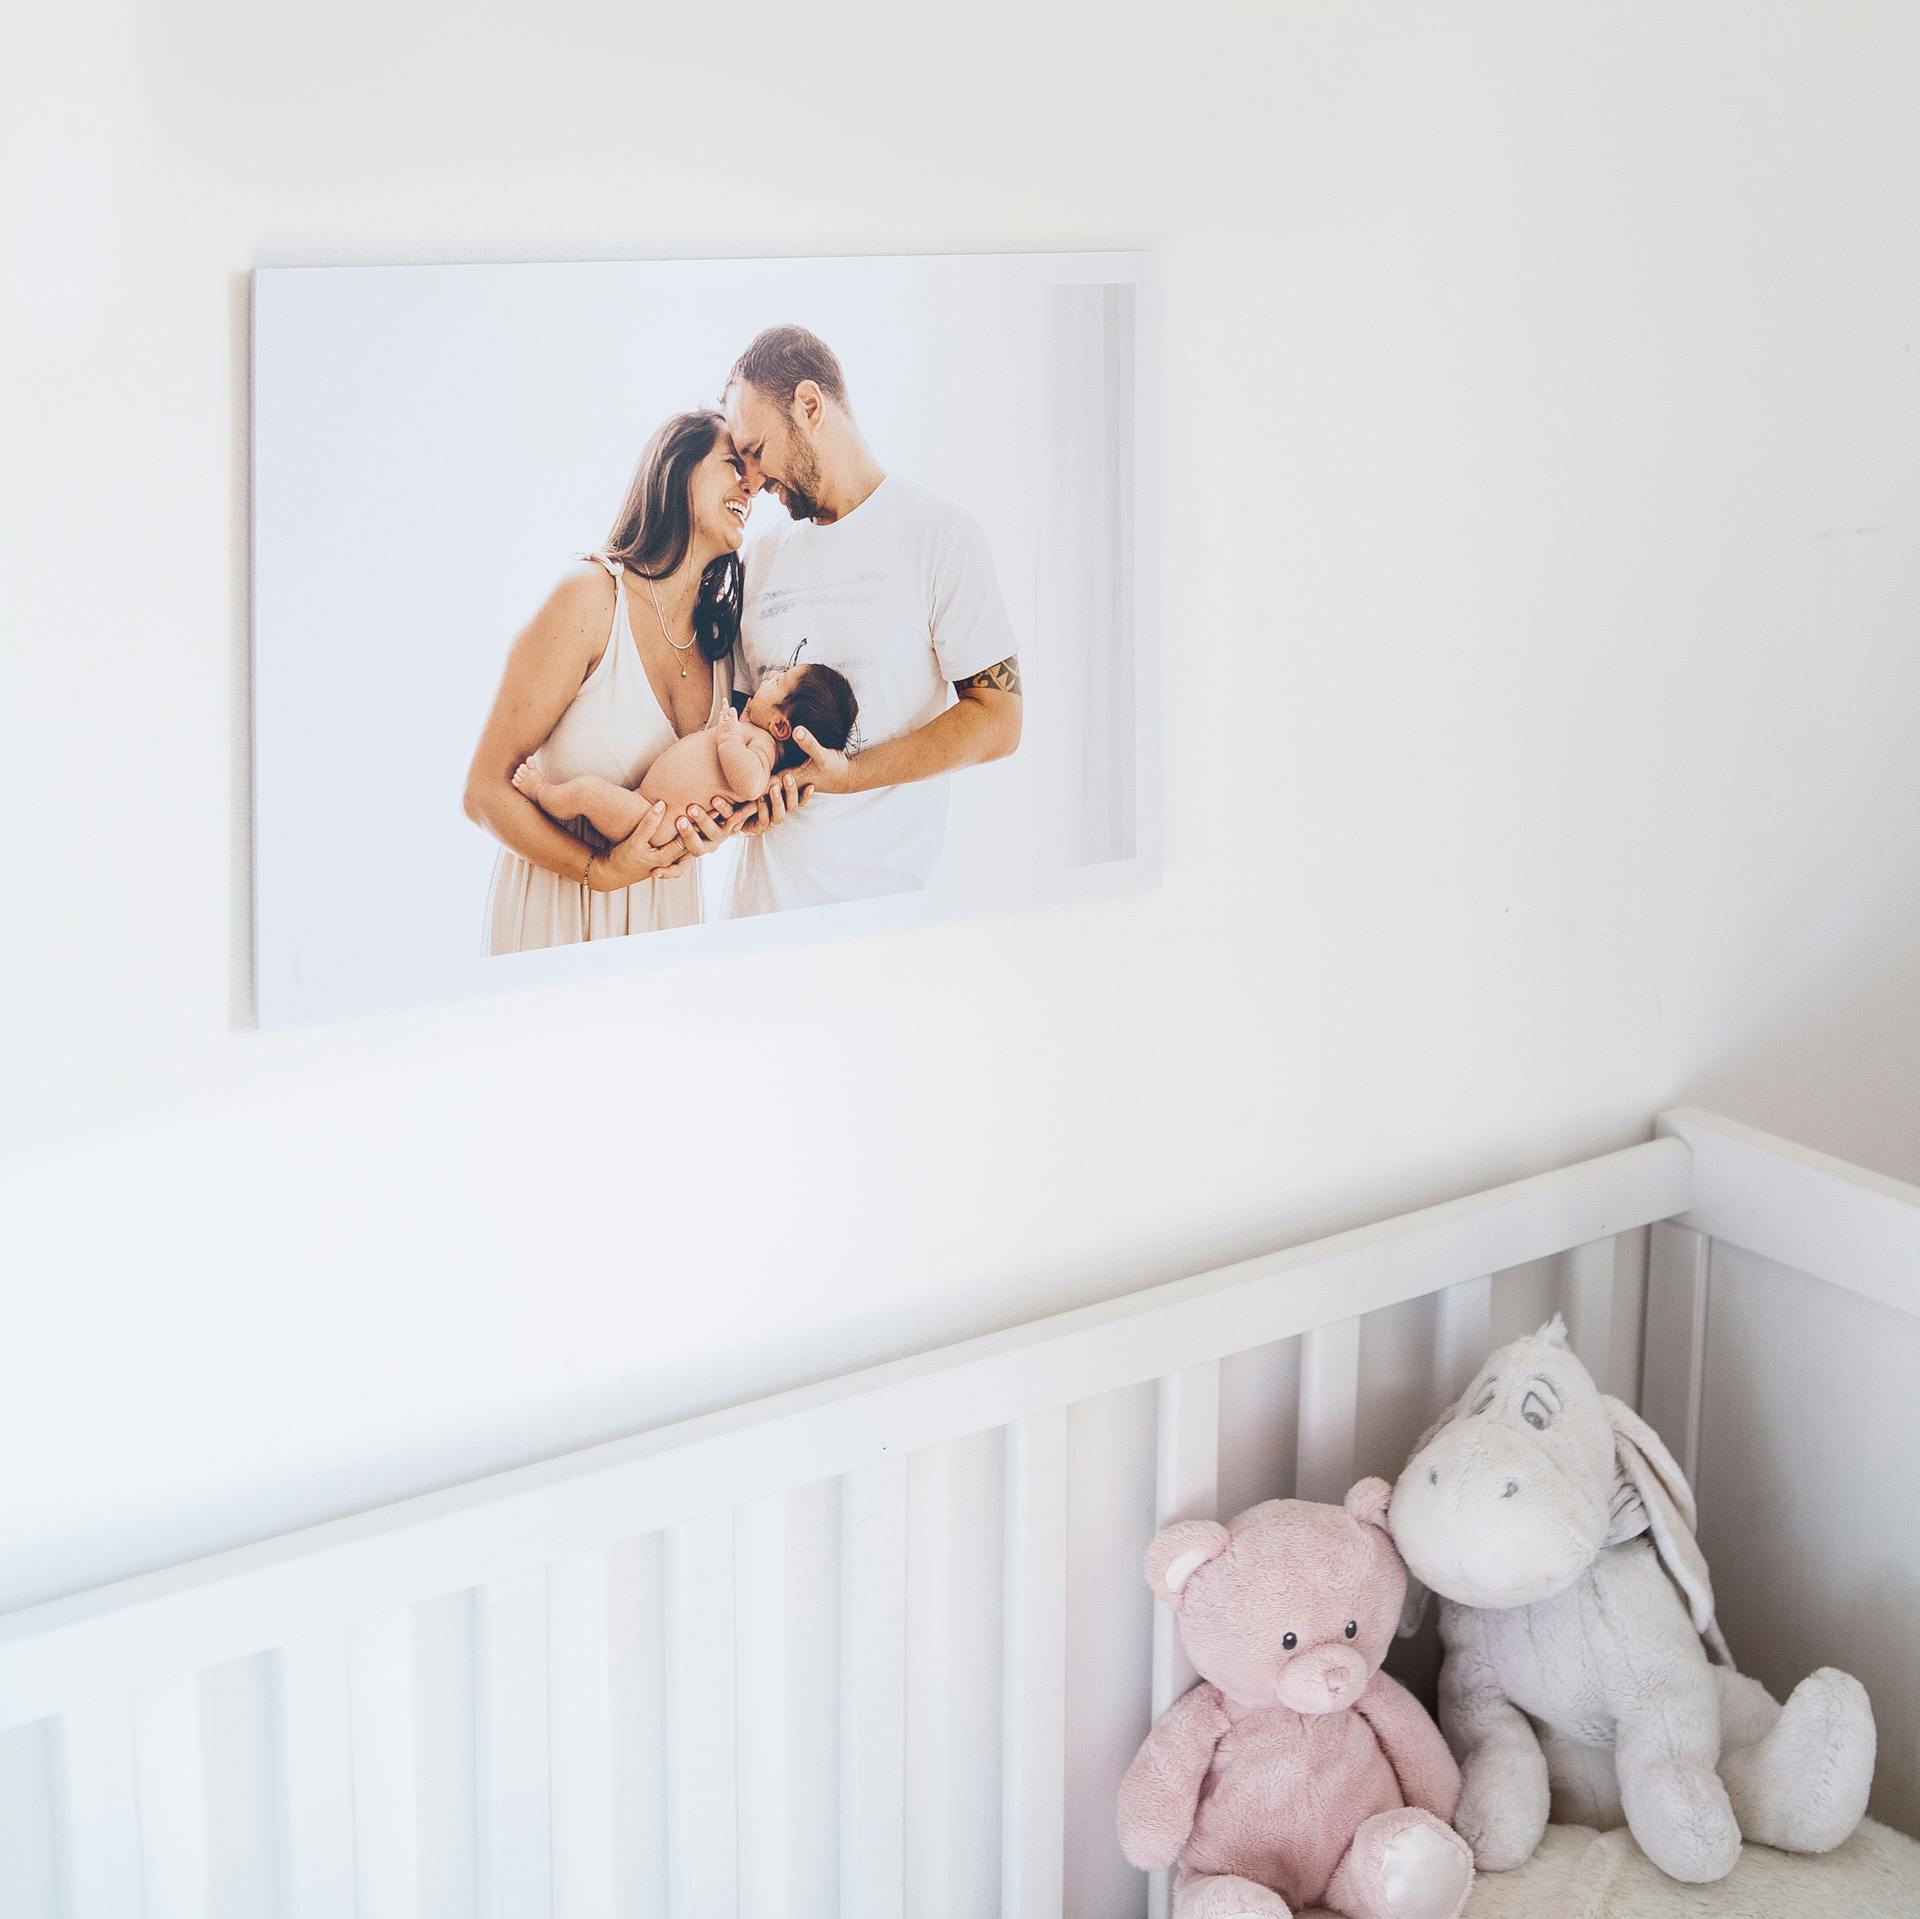 A photo of a couple with their newborn baby hanging in a room | Source: Pexels